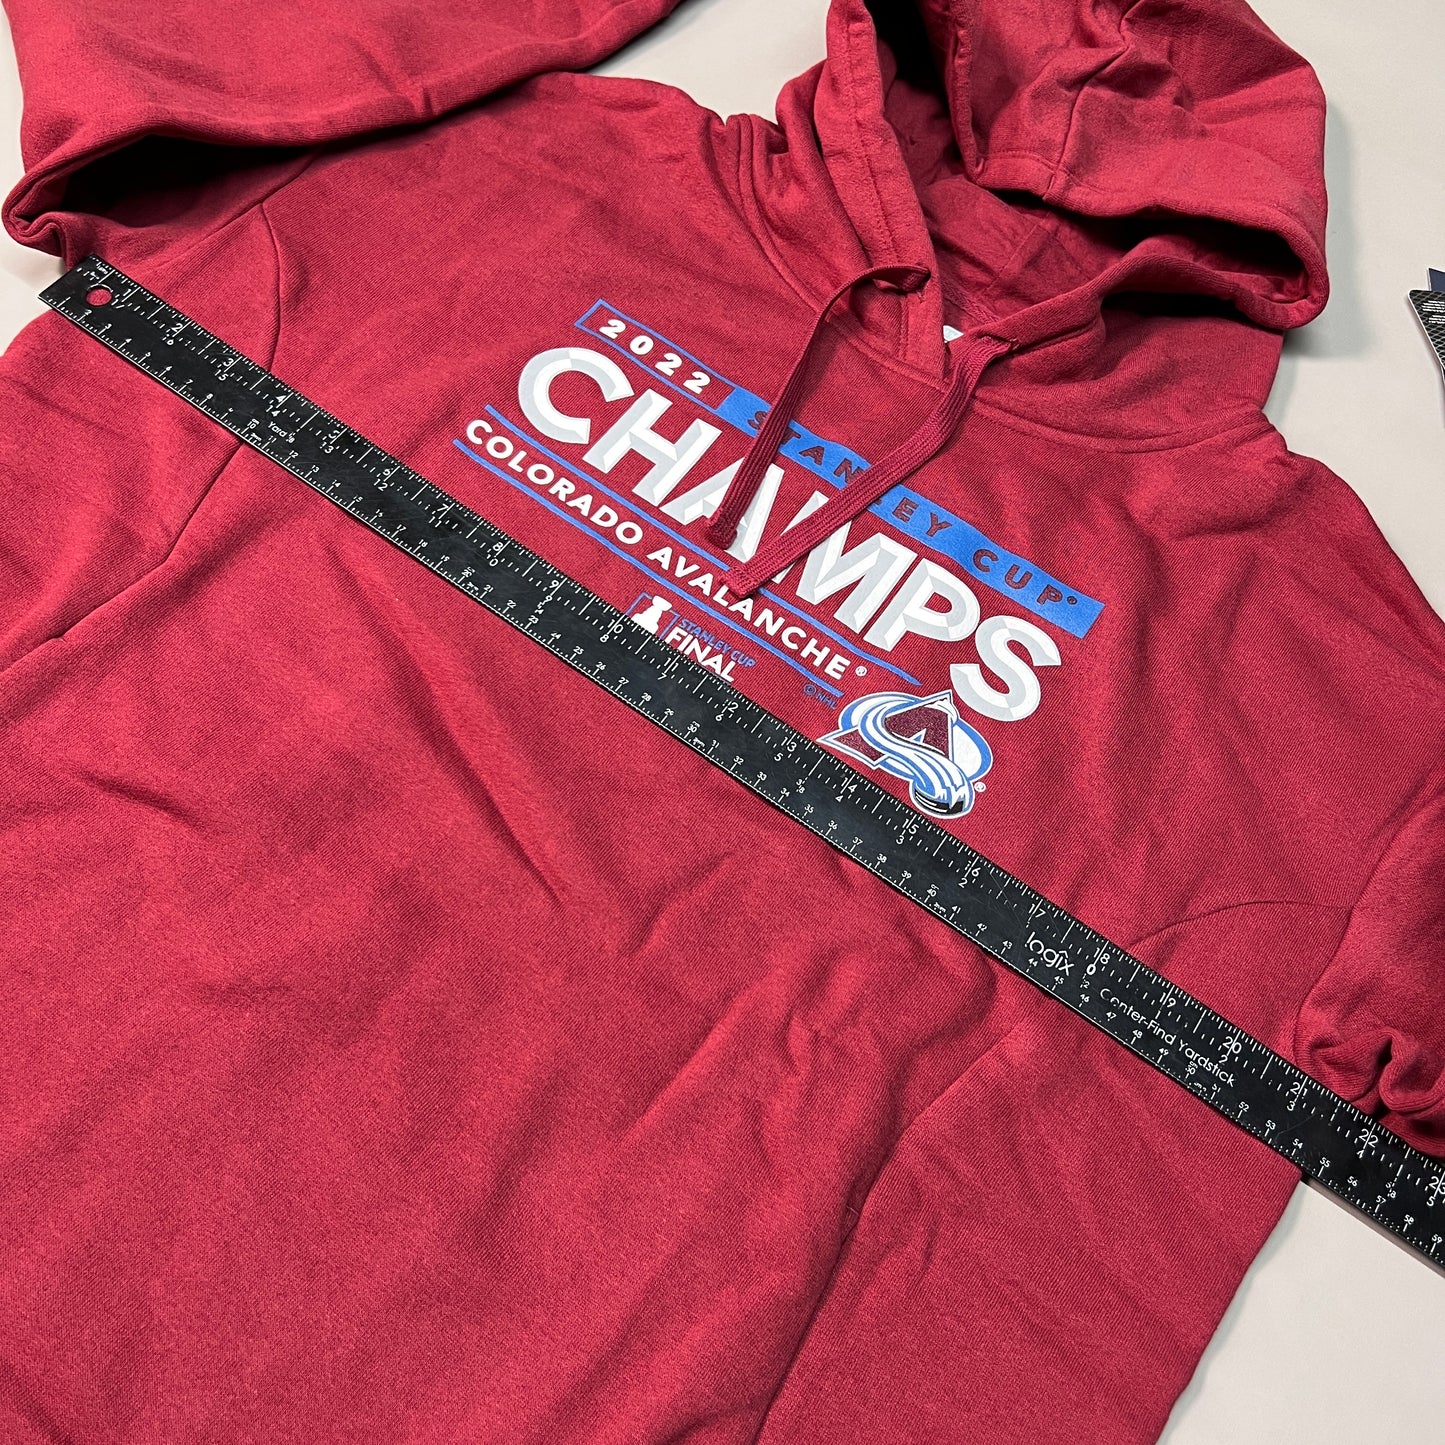 FANATICS 2022 Stanley Cup Champs Colorado Avalanche Final Hoodie Sz M Burgundy 22NHL0024 (New)